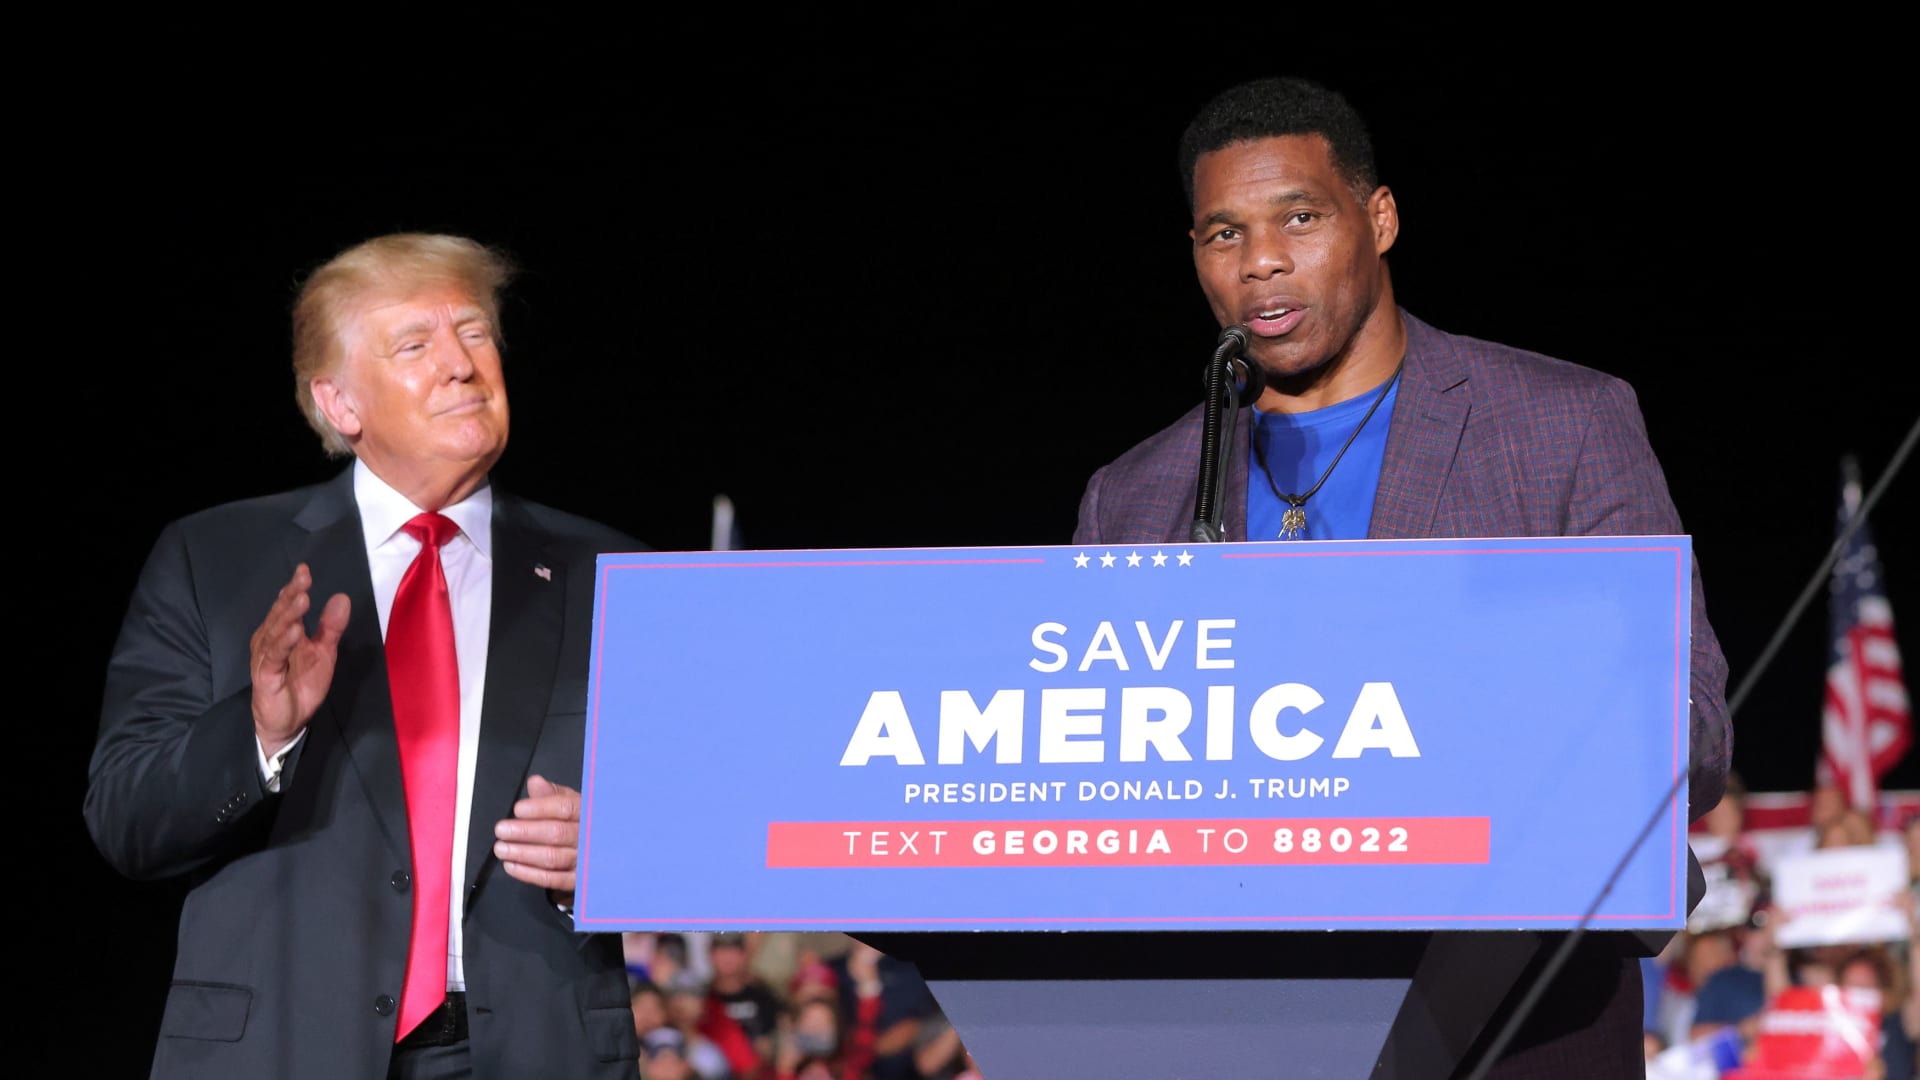 Former college football star and current senatorial candidate Herschel Walker speaks at a rally, as former U.S. President Donald Trump applauds, in Perry, Georgia, U.S. September 25, 2021.